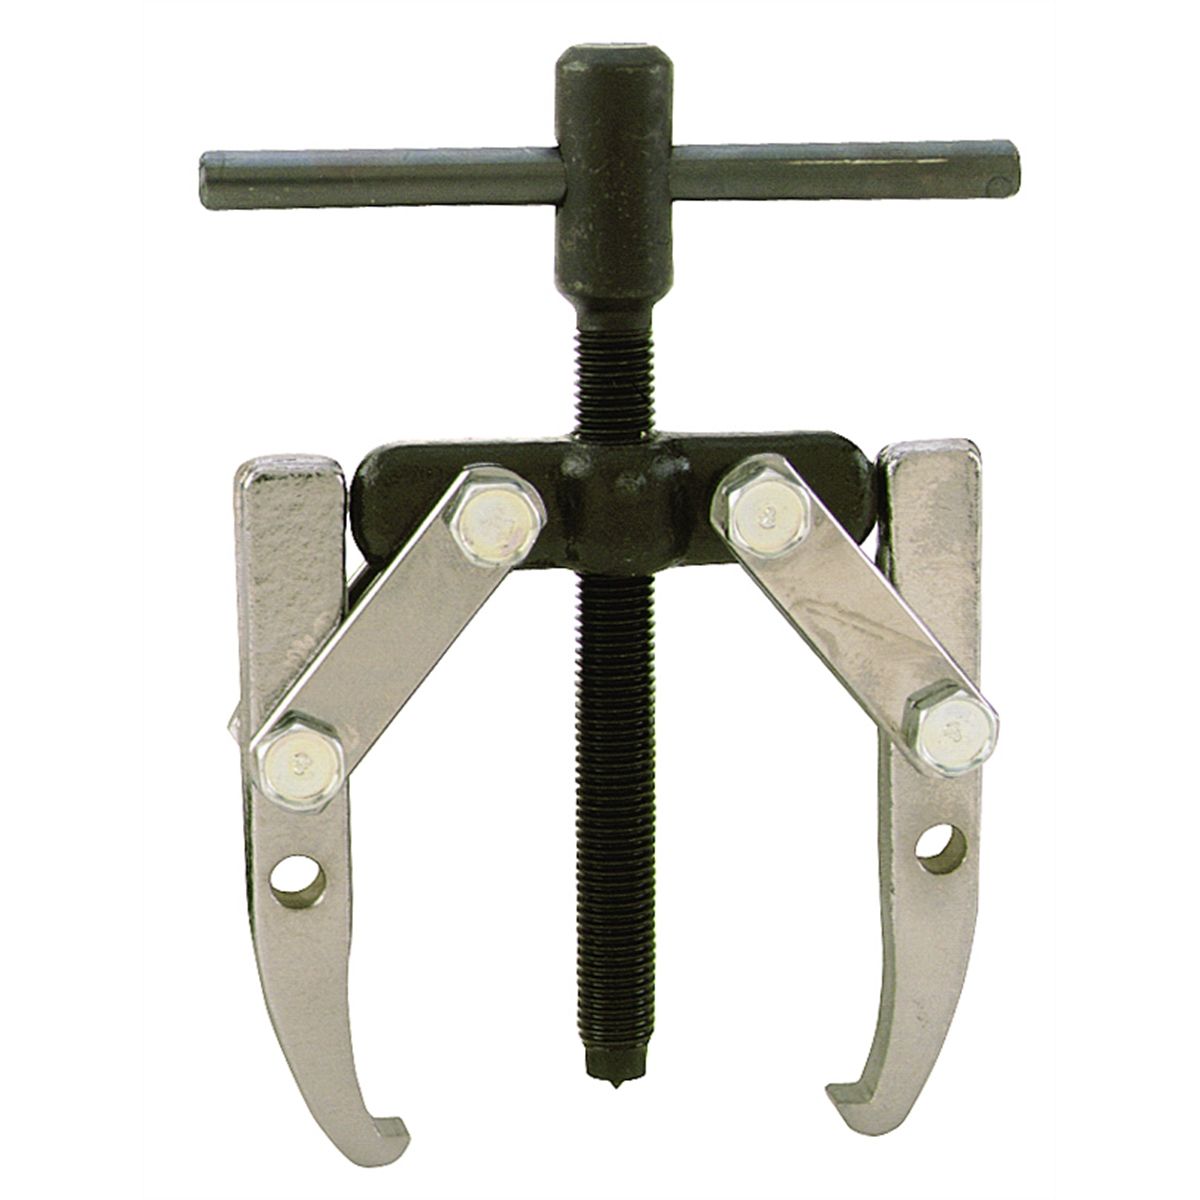 Mechanical Grip-O-Matic(R) Puller - 1 Ton Capacity, 2 Jaw